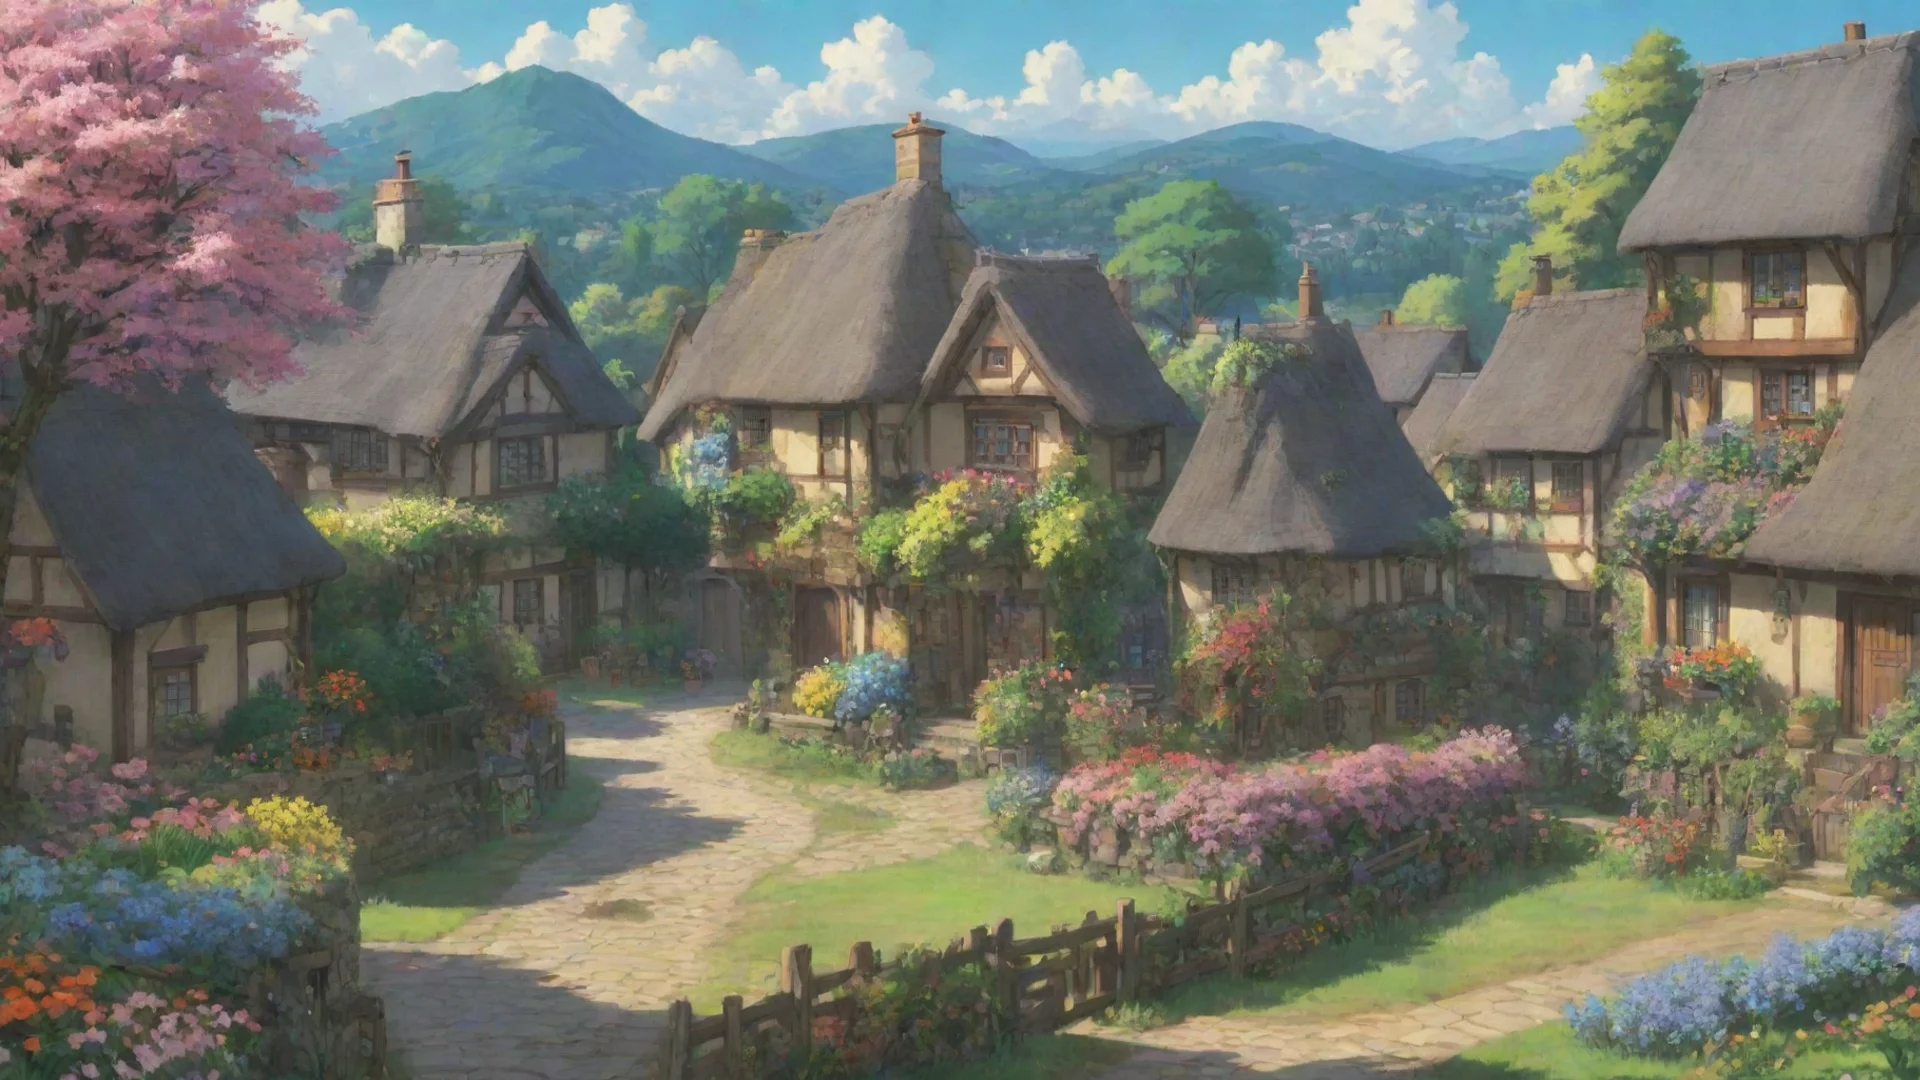 aiamazing wonderful ghibli landscape epic anime hd aesthetic town cottages flowers awesome portrait 2 wide